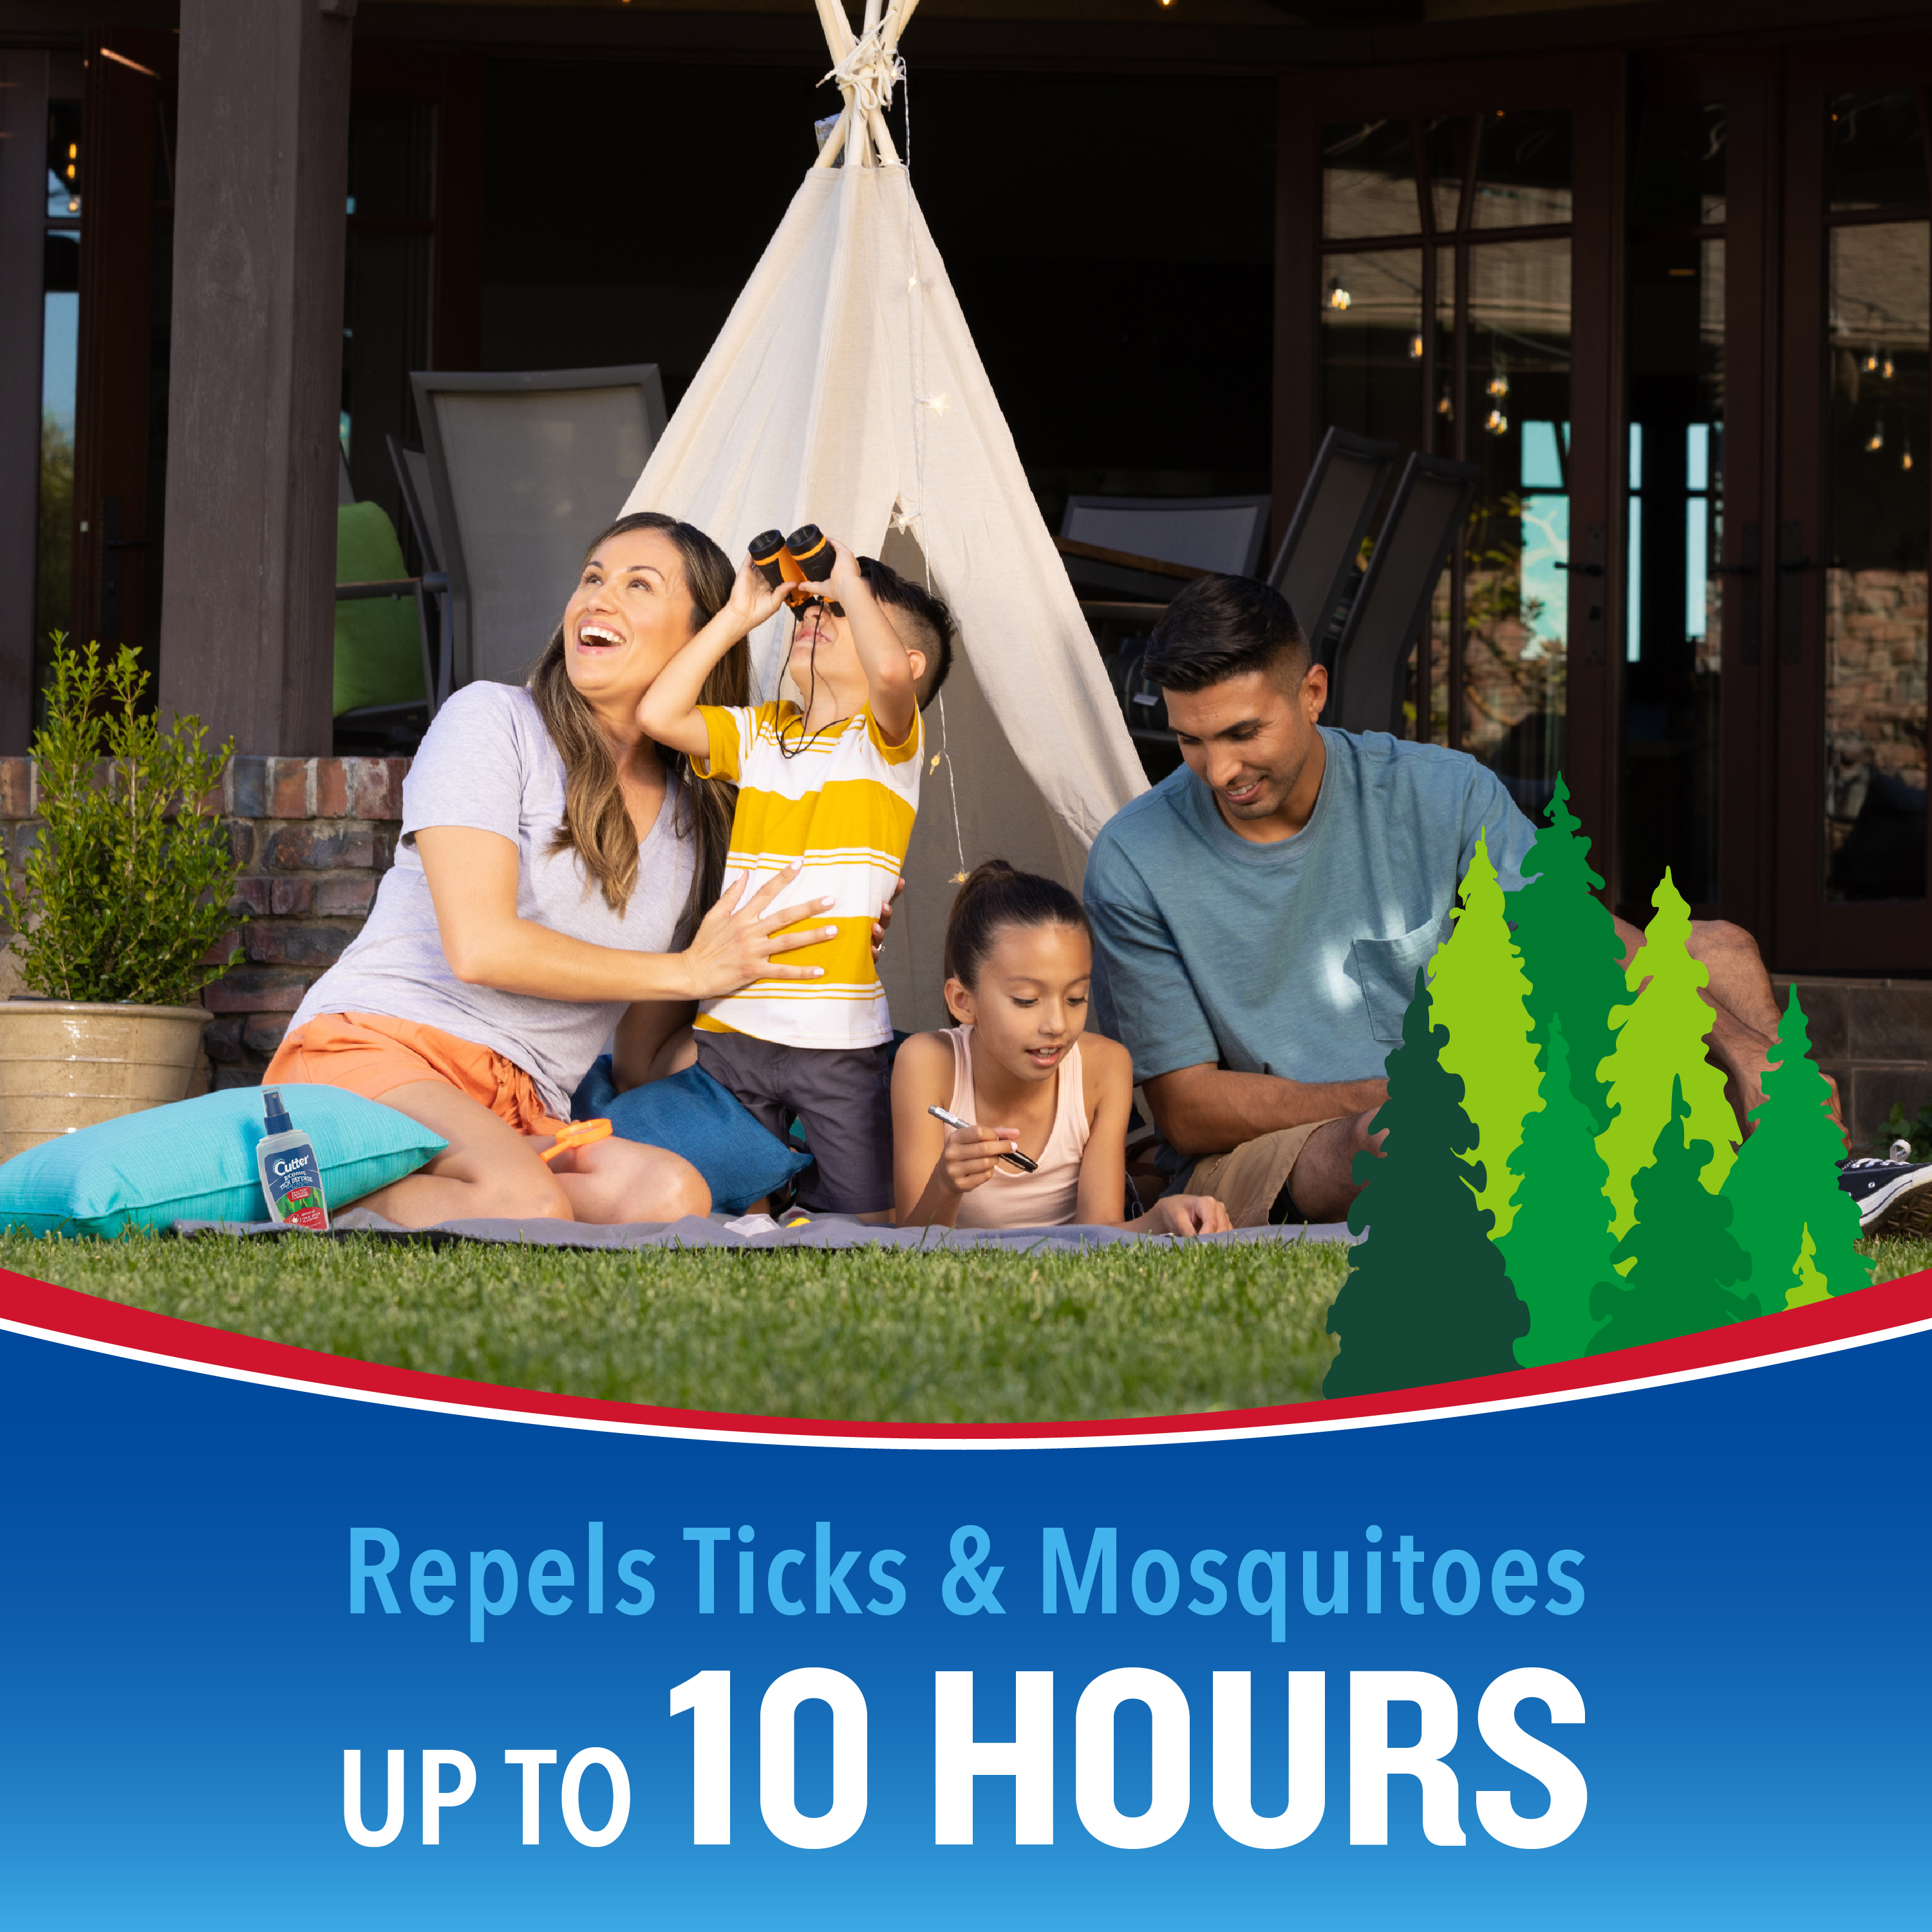 HG-96851 Backwoods® Tick Defense® Insect Repellent 6 oz (Pump Spray) - Repels up to 10 Hours